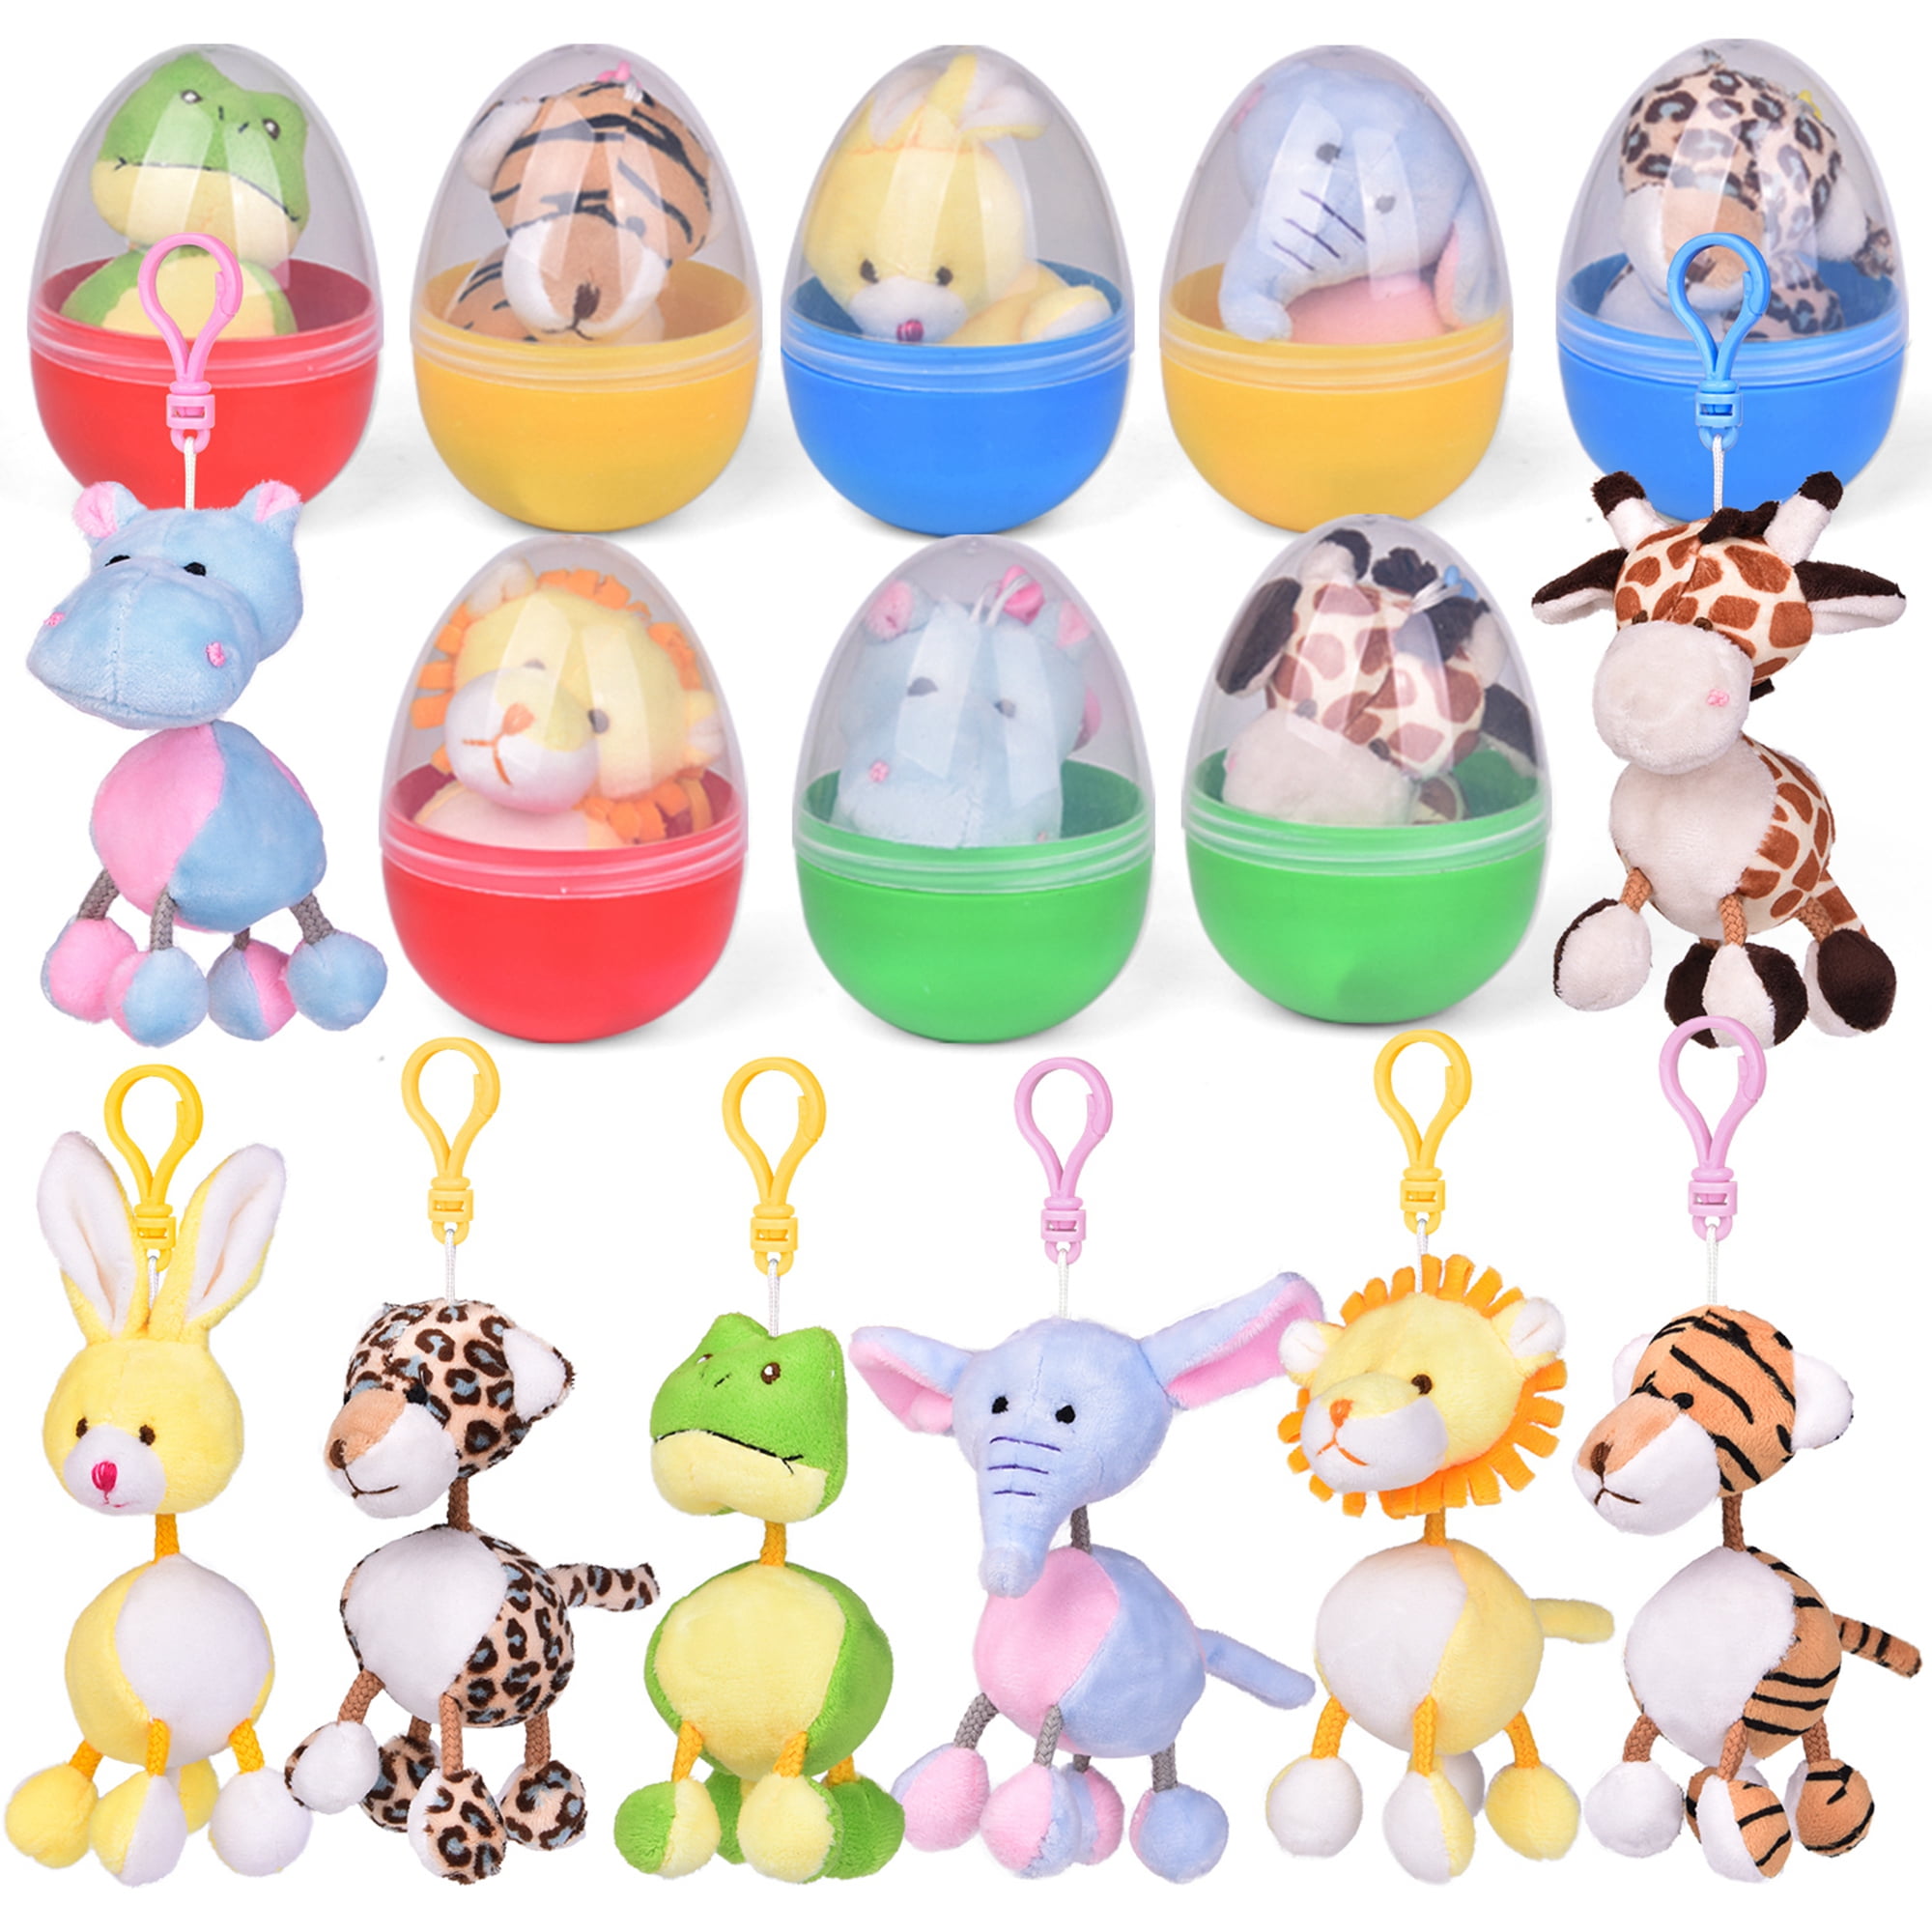 Easter Eggs 8 PCs Filled with Plush Bunny-Colorful Easter Eggs Toys for Kids Party Favors Surprise Gifts 